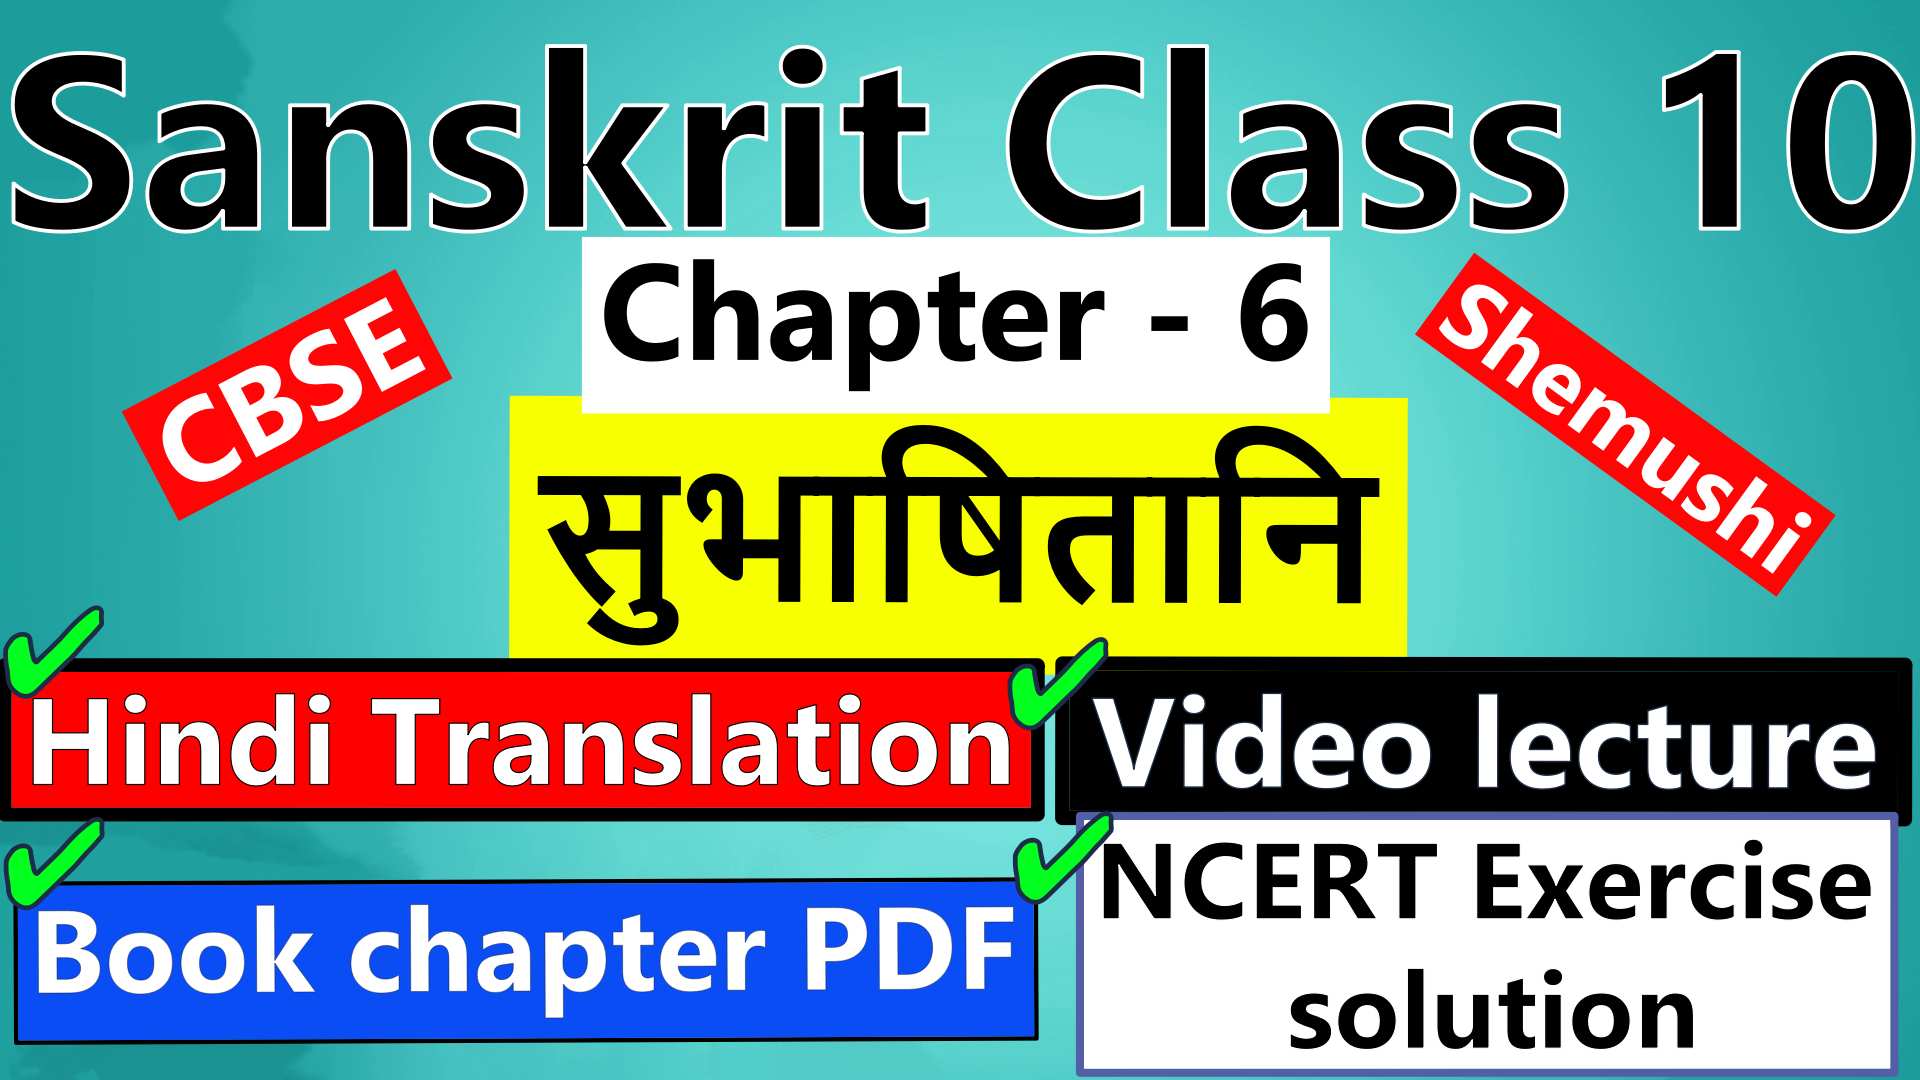 sanskrit-class-10-chapter-6-सुभाषितानि-Hindi-Translation-Video-lecture-NCERT-Exercise-Solution-Question-Answer-Book-chapter-PDF